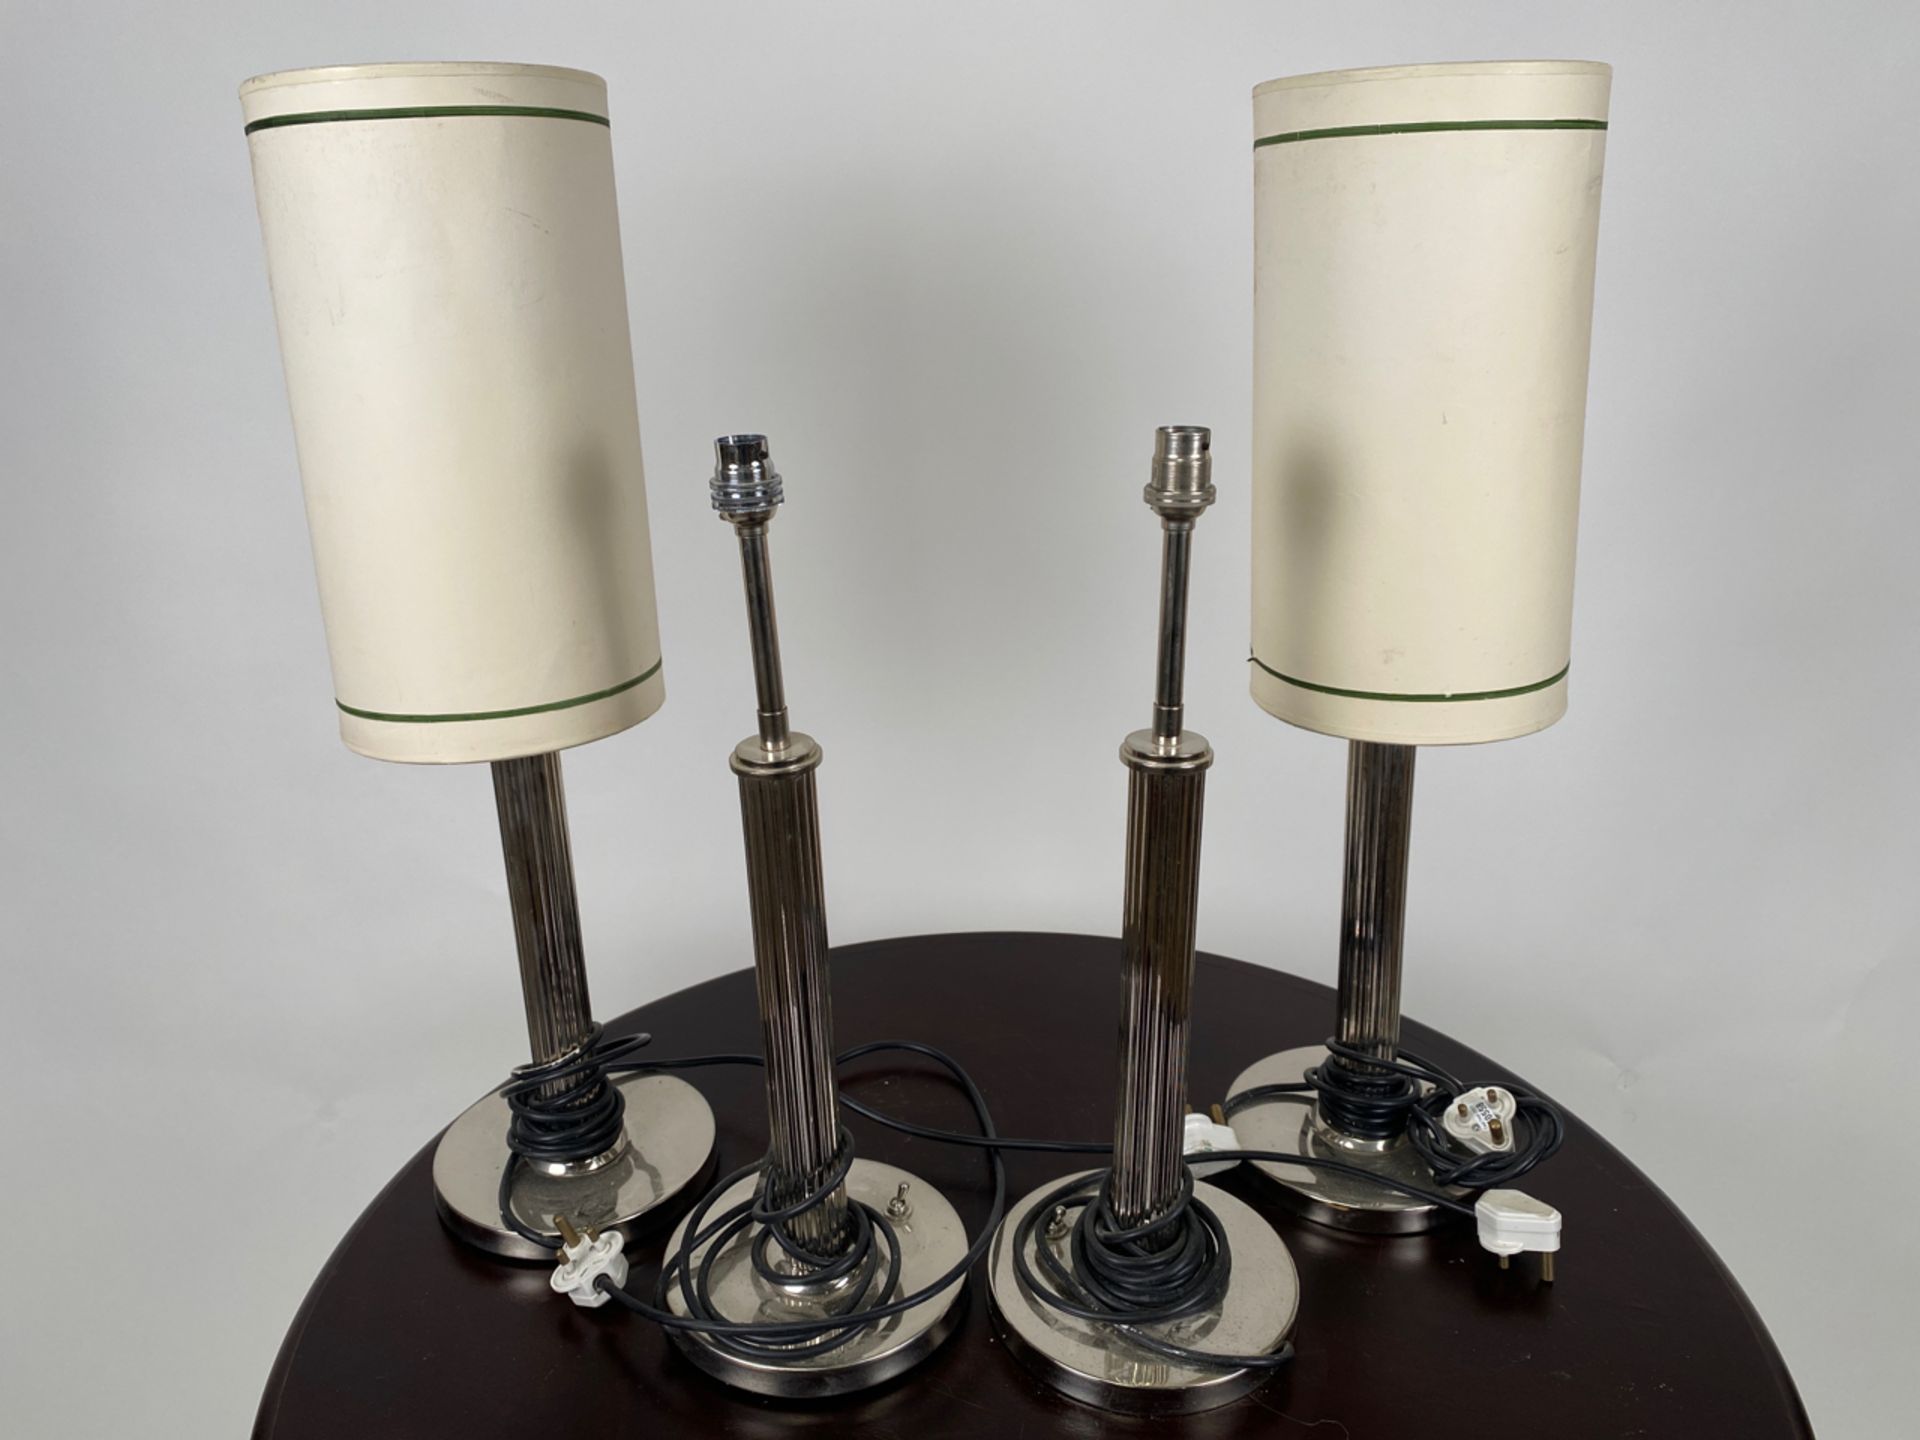 Set of 4 French Style Nickel Table Lamps - Image 2 of 4